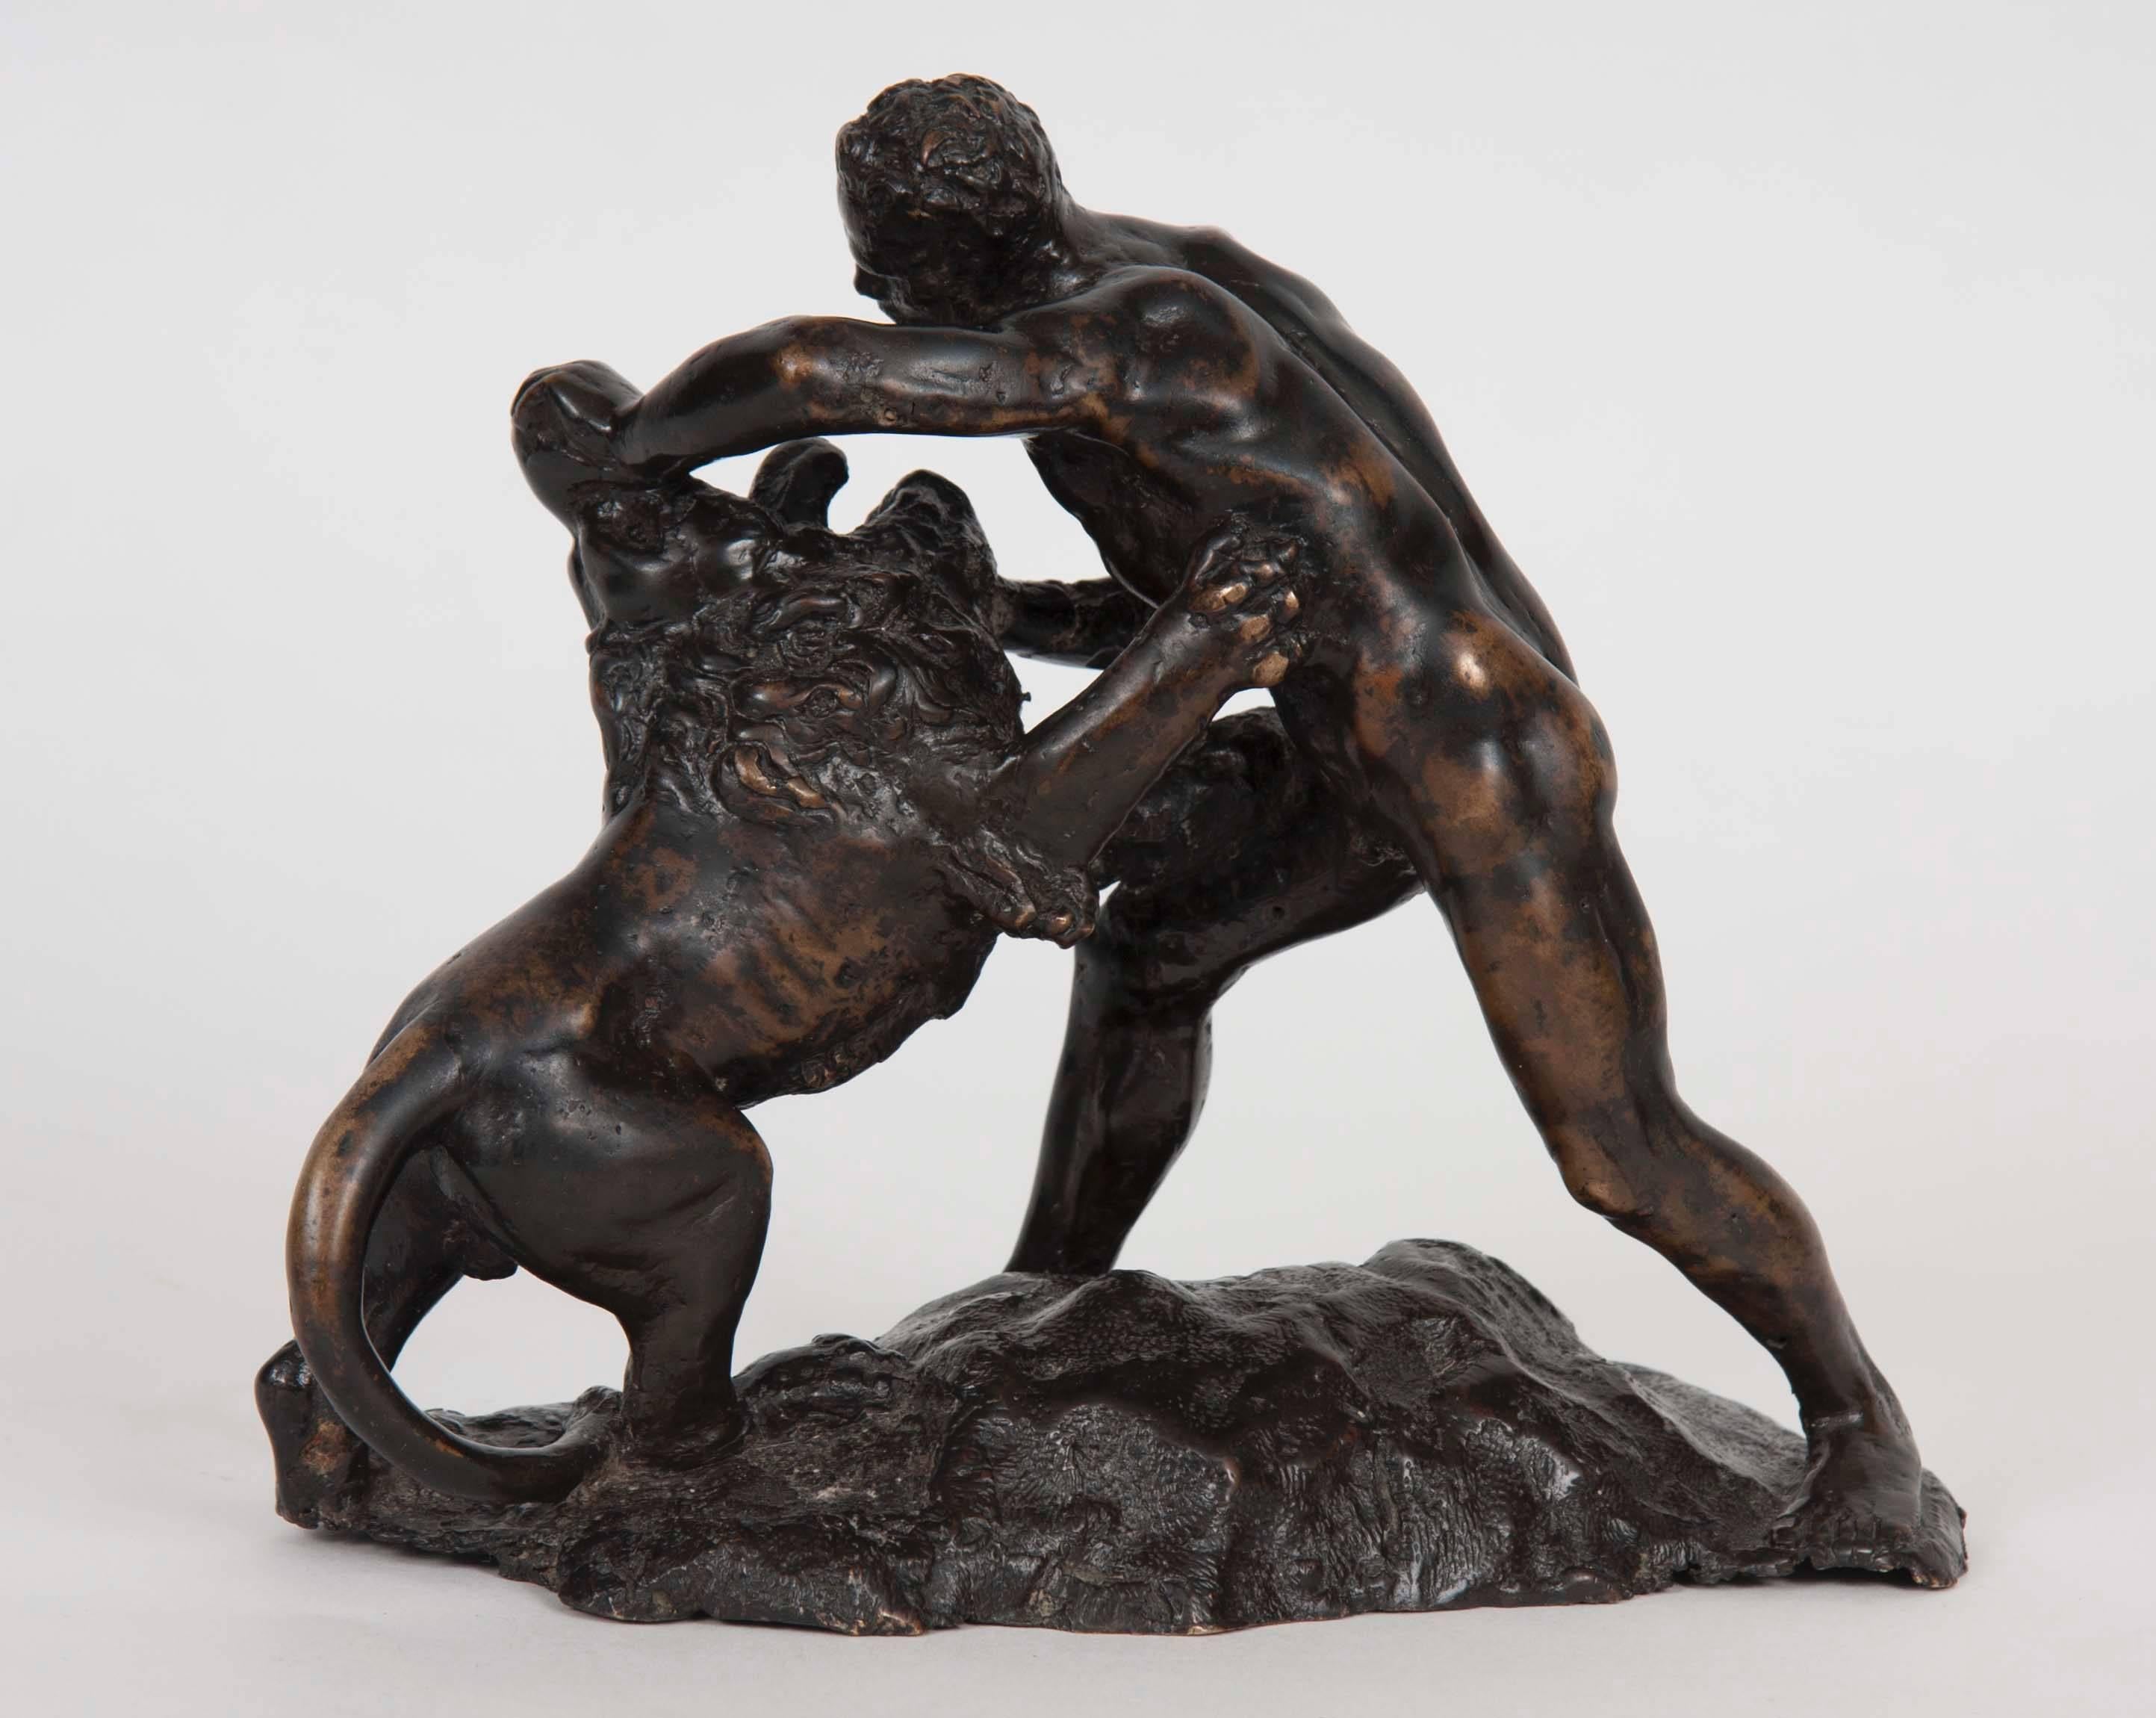 Bronze Group of Hercules and the Nemean Lion, Italian, 17th century.